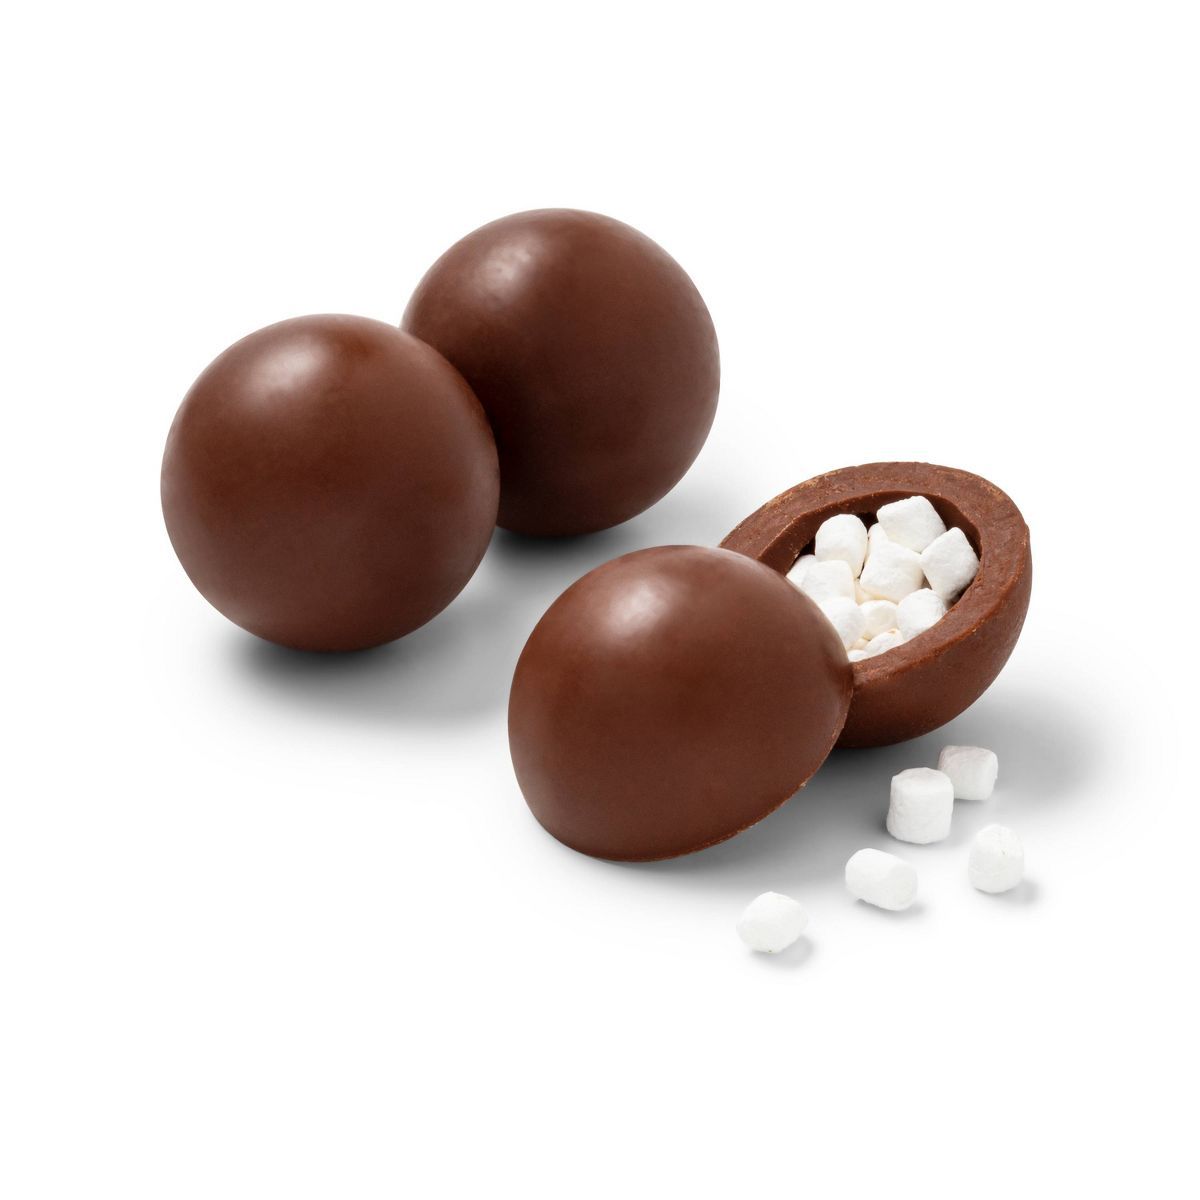 Holiday Hot Chocolate Drink Bombs - 2.75oz/3ct - Favorite Day™ | Target